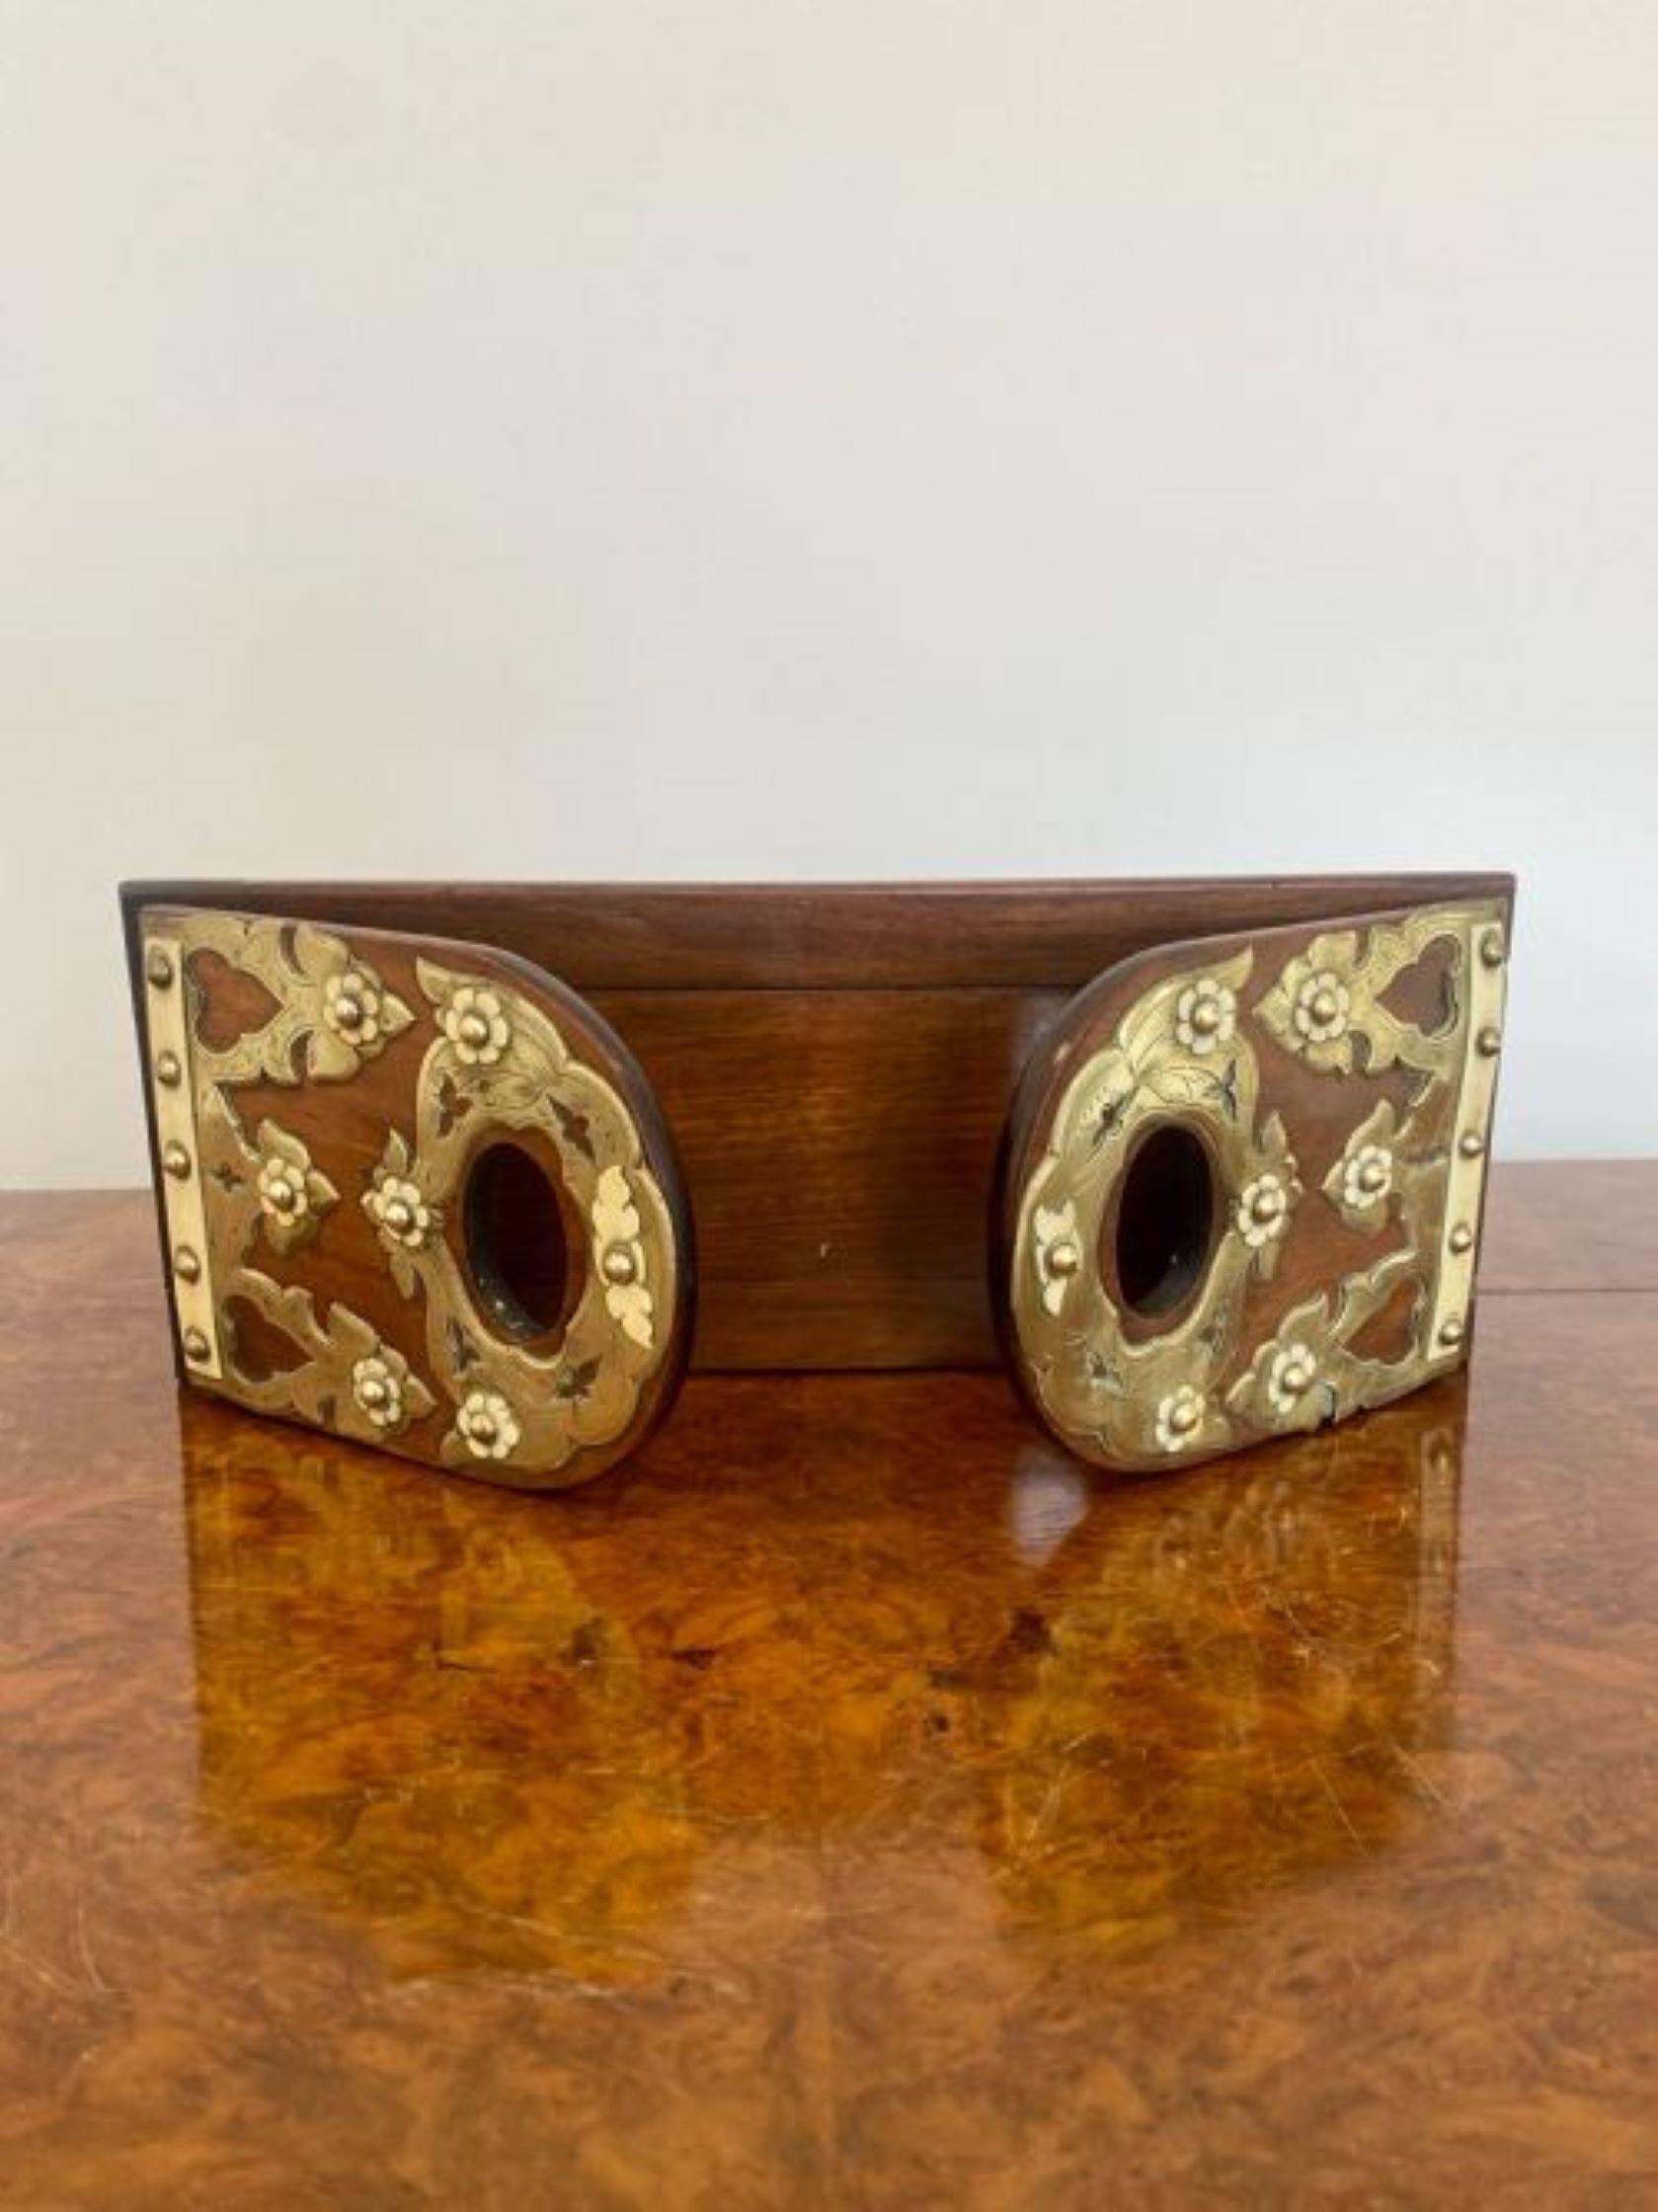 Quality Antique Victorian Walnut & Brass Mounted Sliding Bookends In Good Condition For Sale In Ipswich, GB